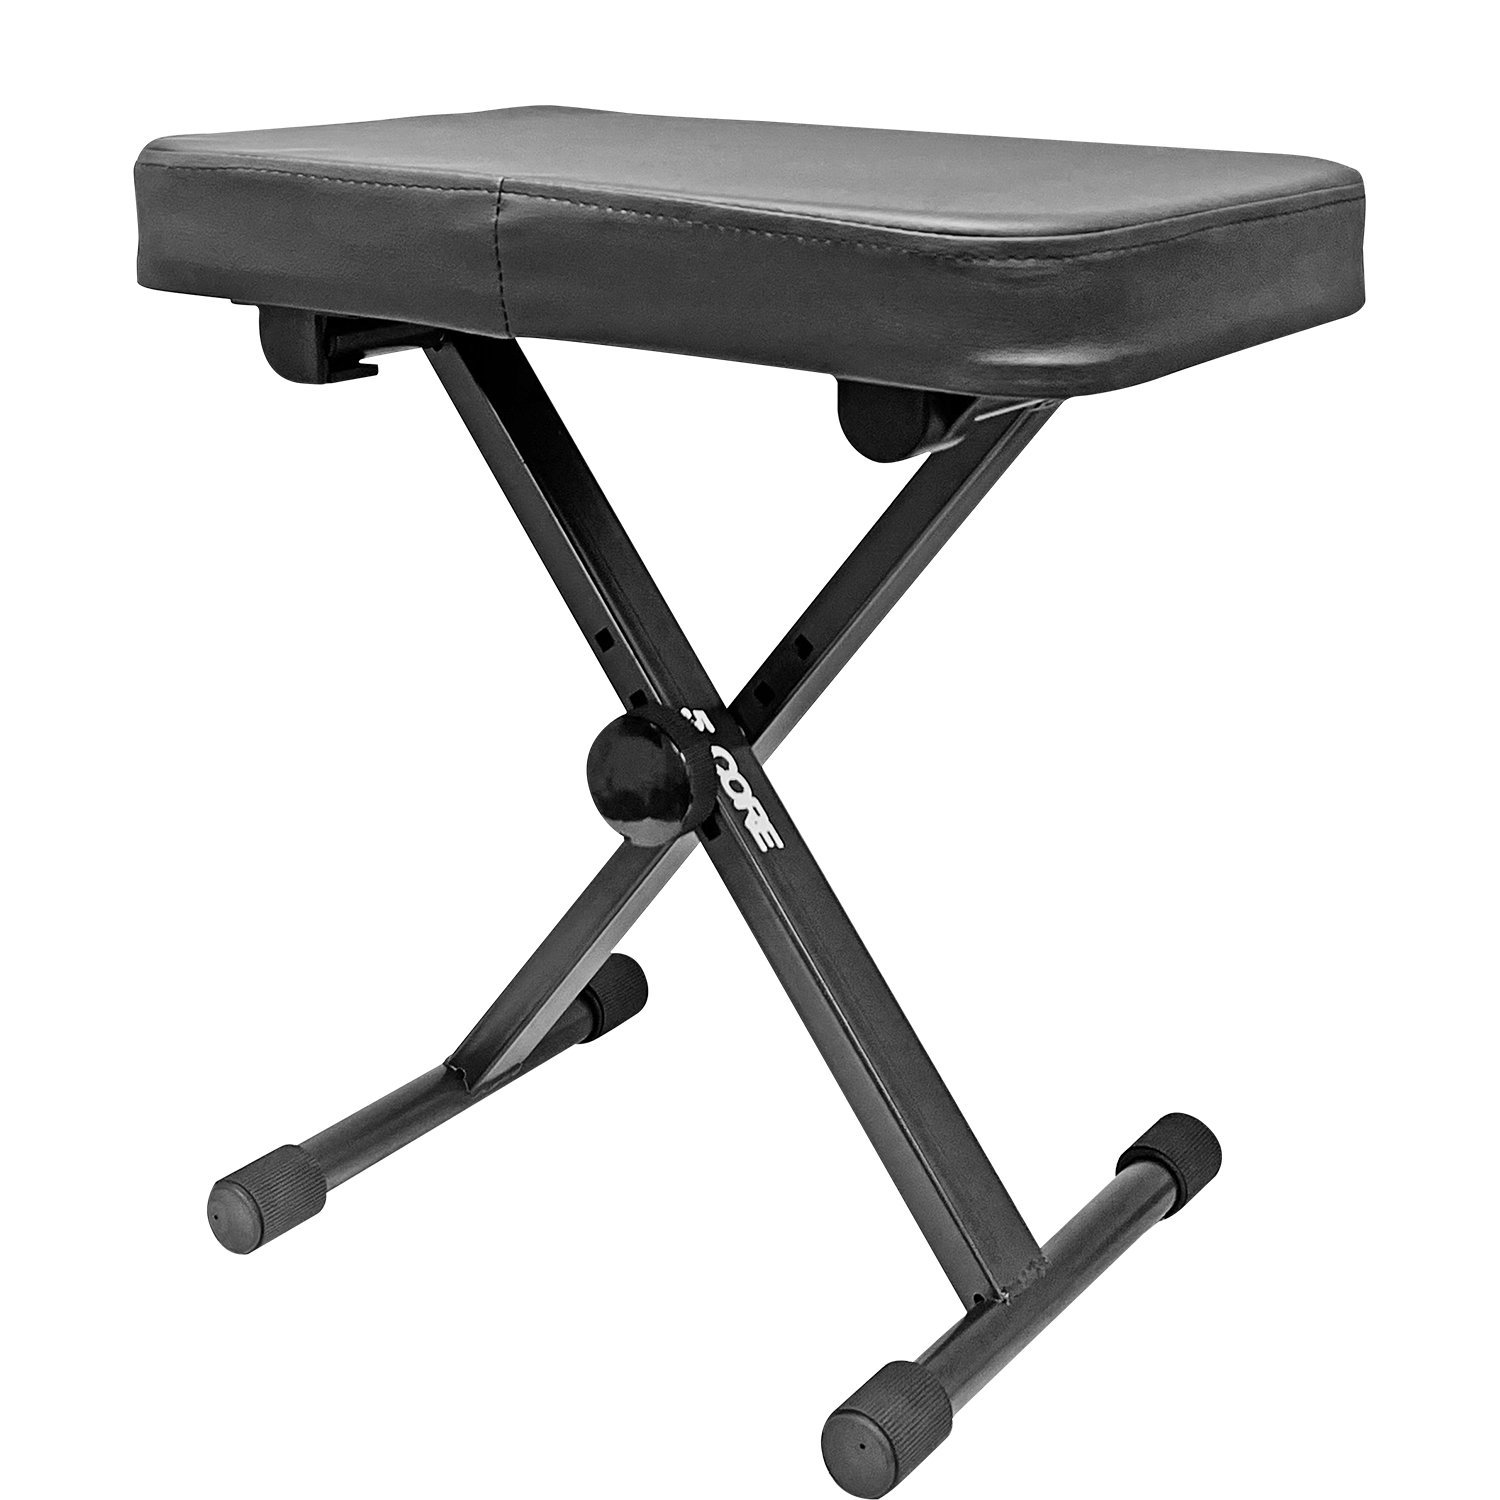 5 Core Piano Keyboard Bench Padded Stool Seat Chair X-style Adjustable Height KBB BLK HD